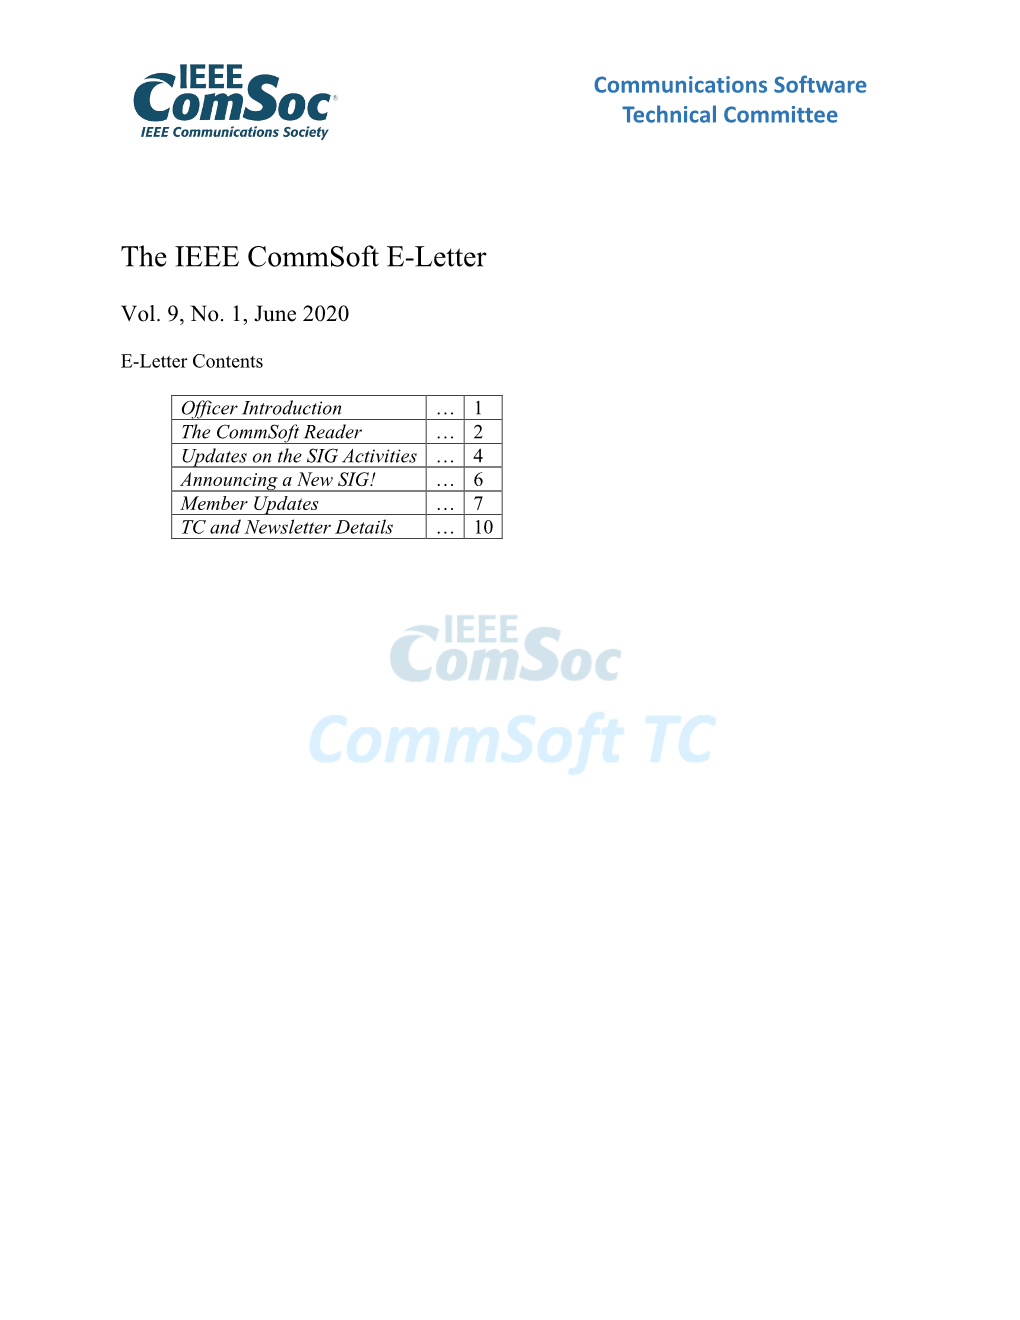 The IEEE Commsoft E-Letter